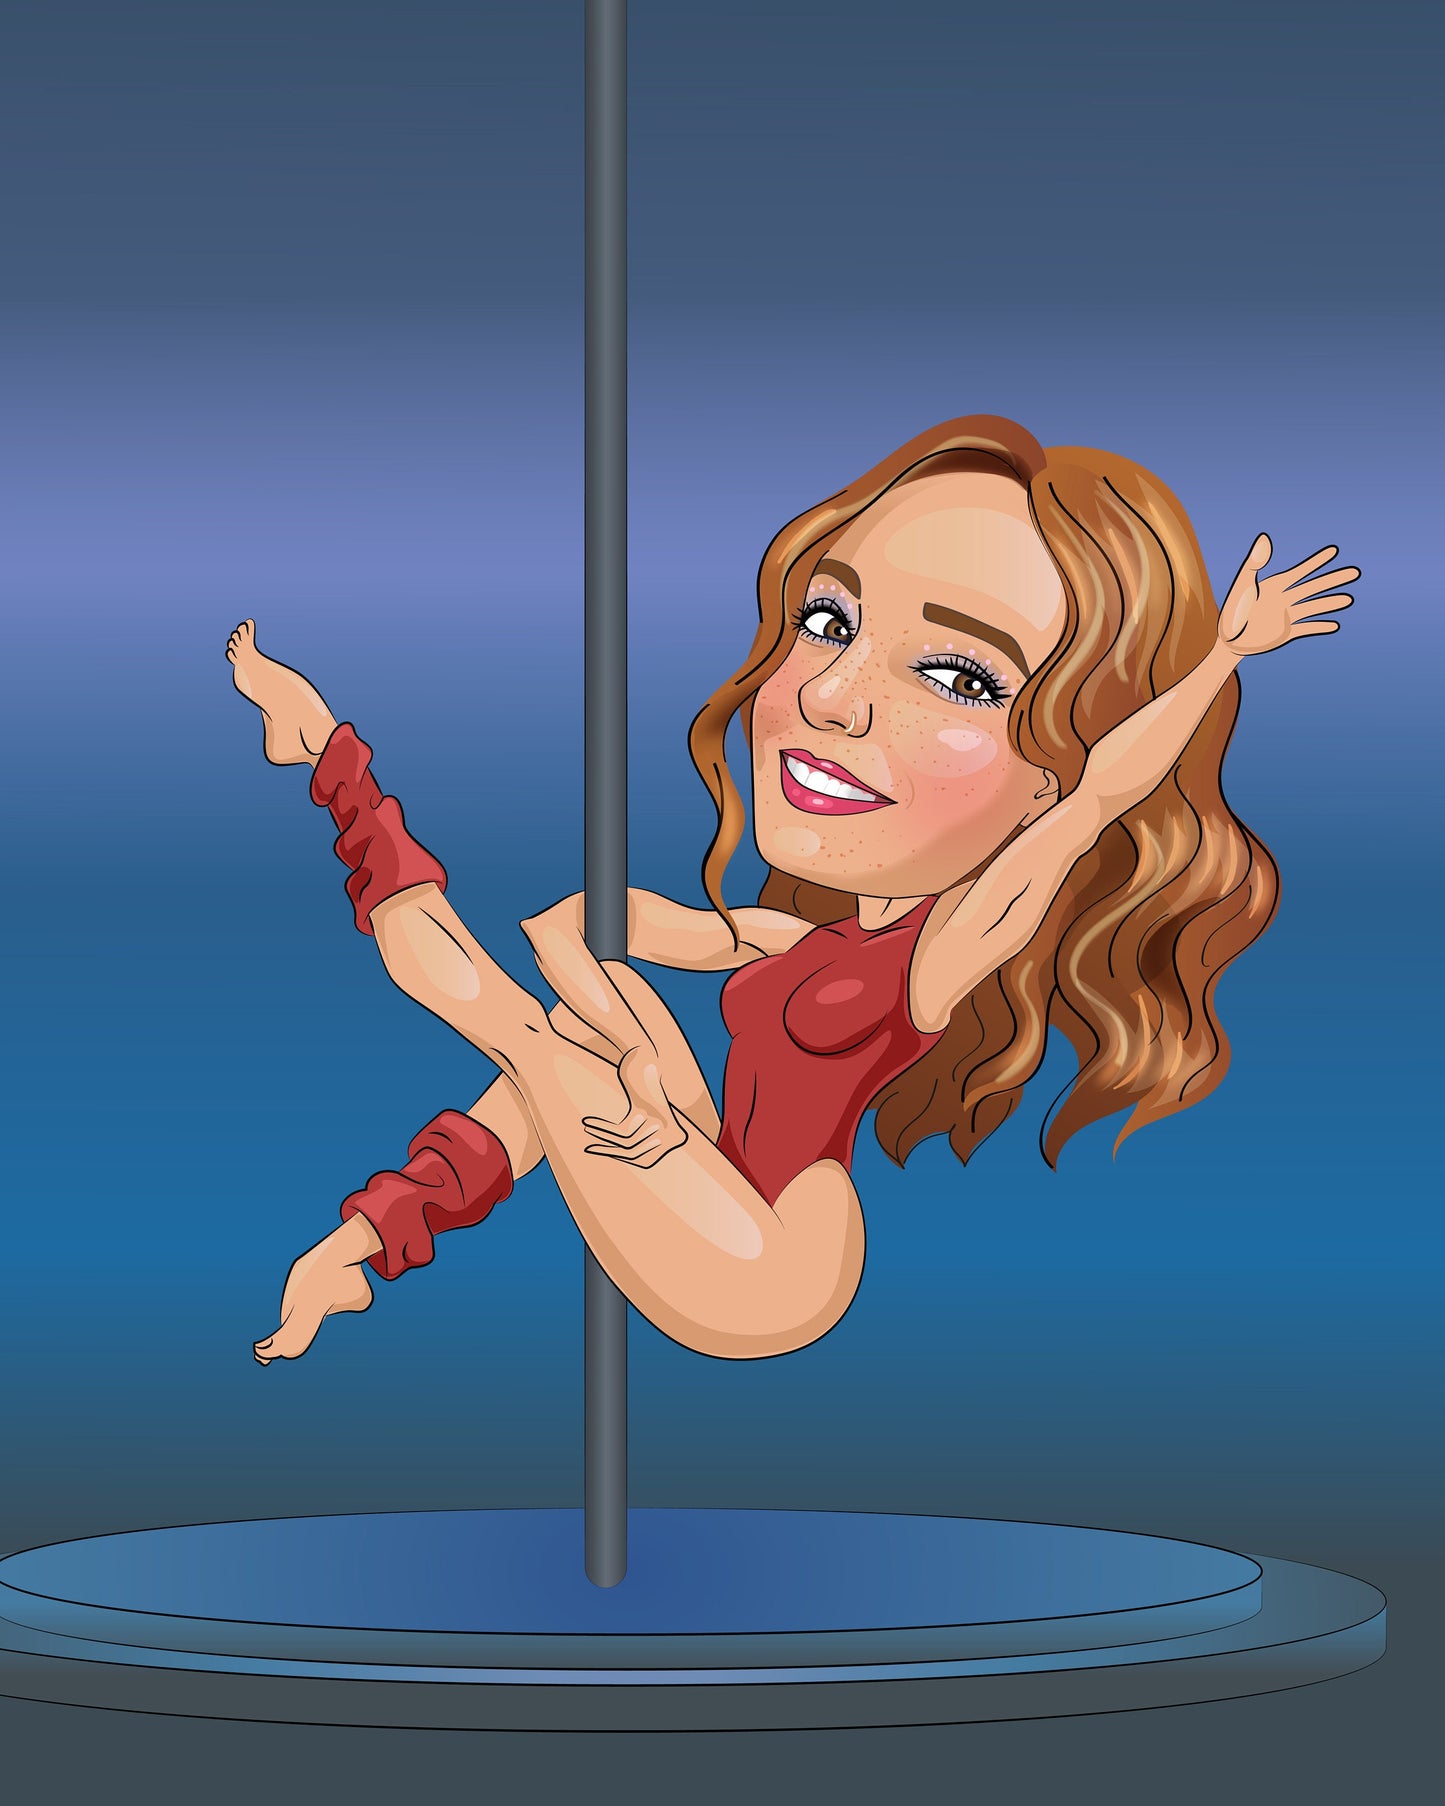 Pole Dancer Gift - Custom Caricature From Photo/pole fitness/pole dancing gift